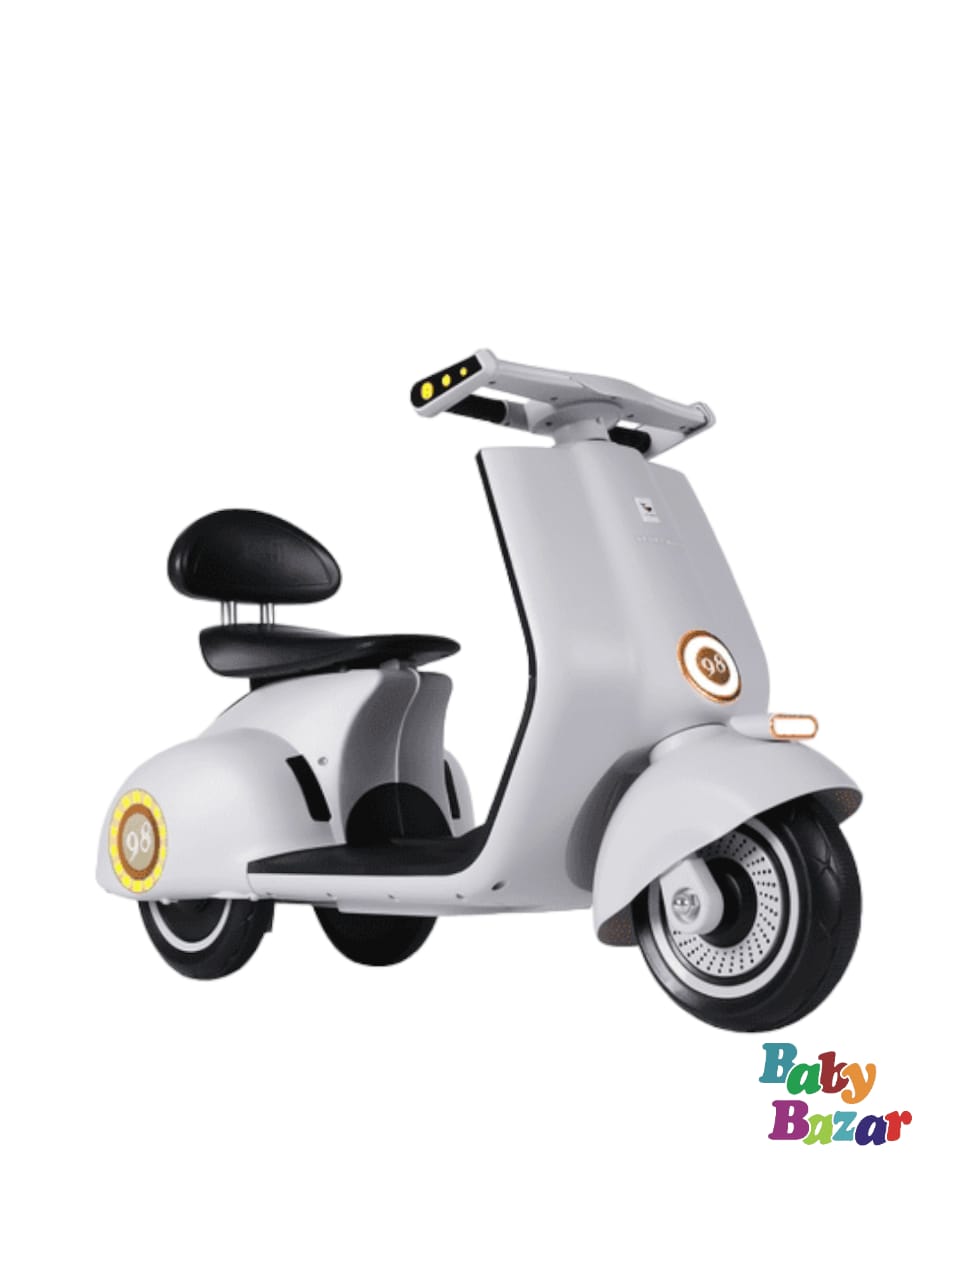 Small Size rechargeable Mini  Vespa  motorcycles